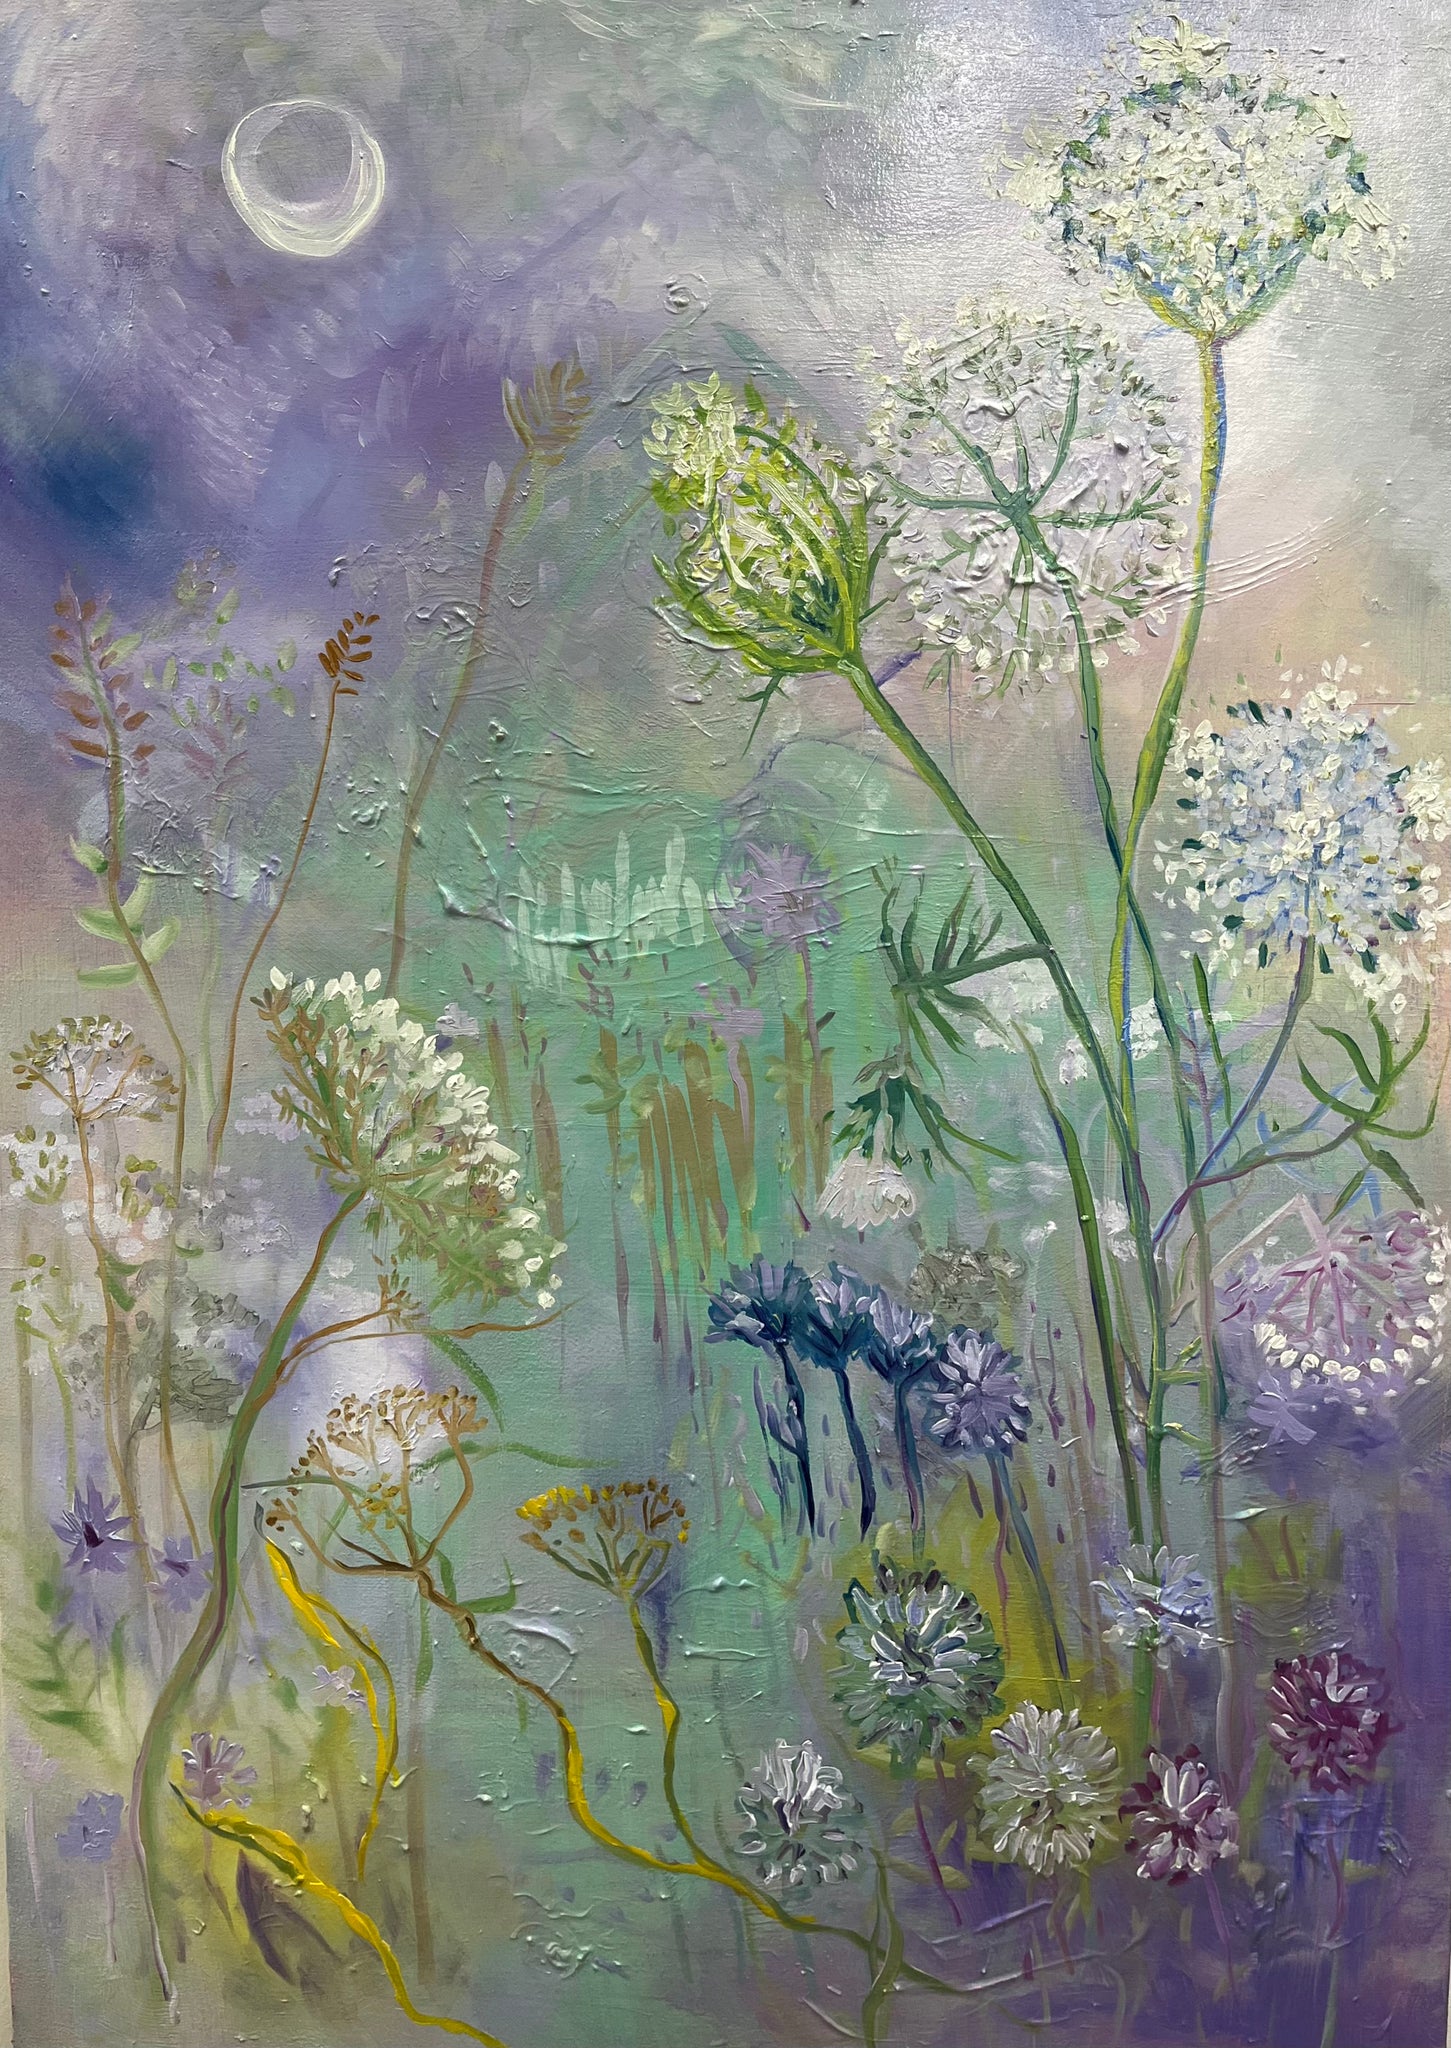 PRINT "Lace and Cornflowers" A Vertical Fine Art Giclee Reproduction